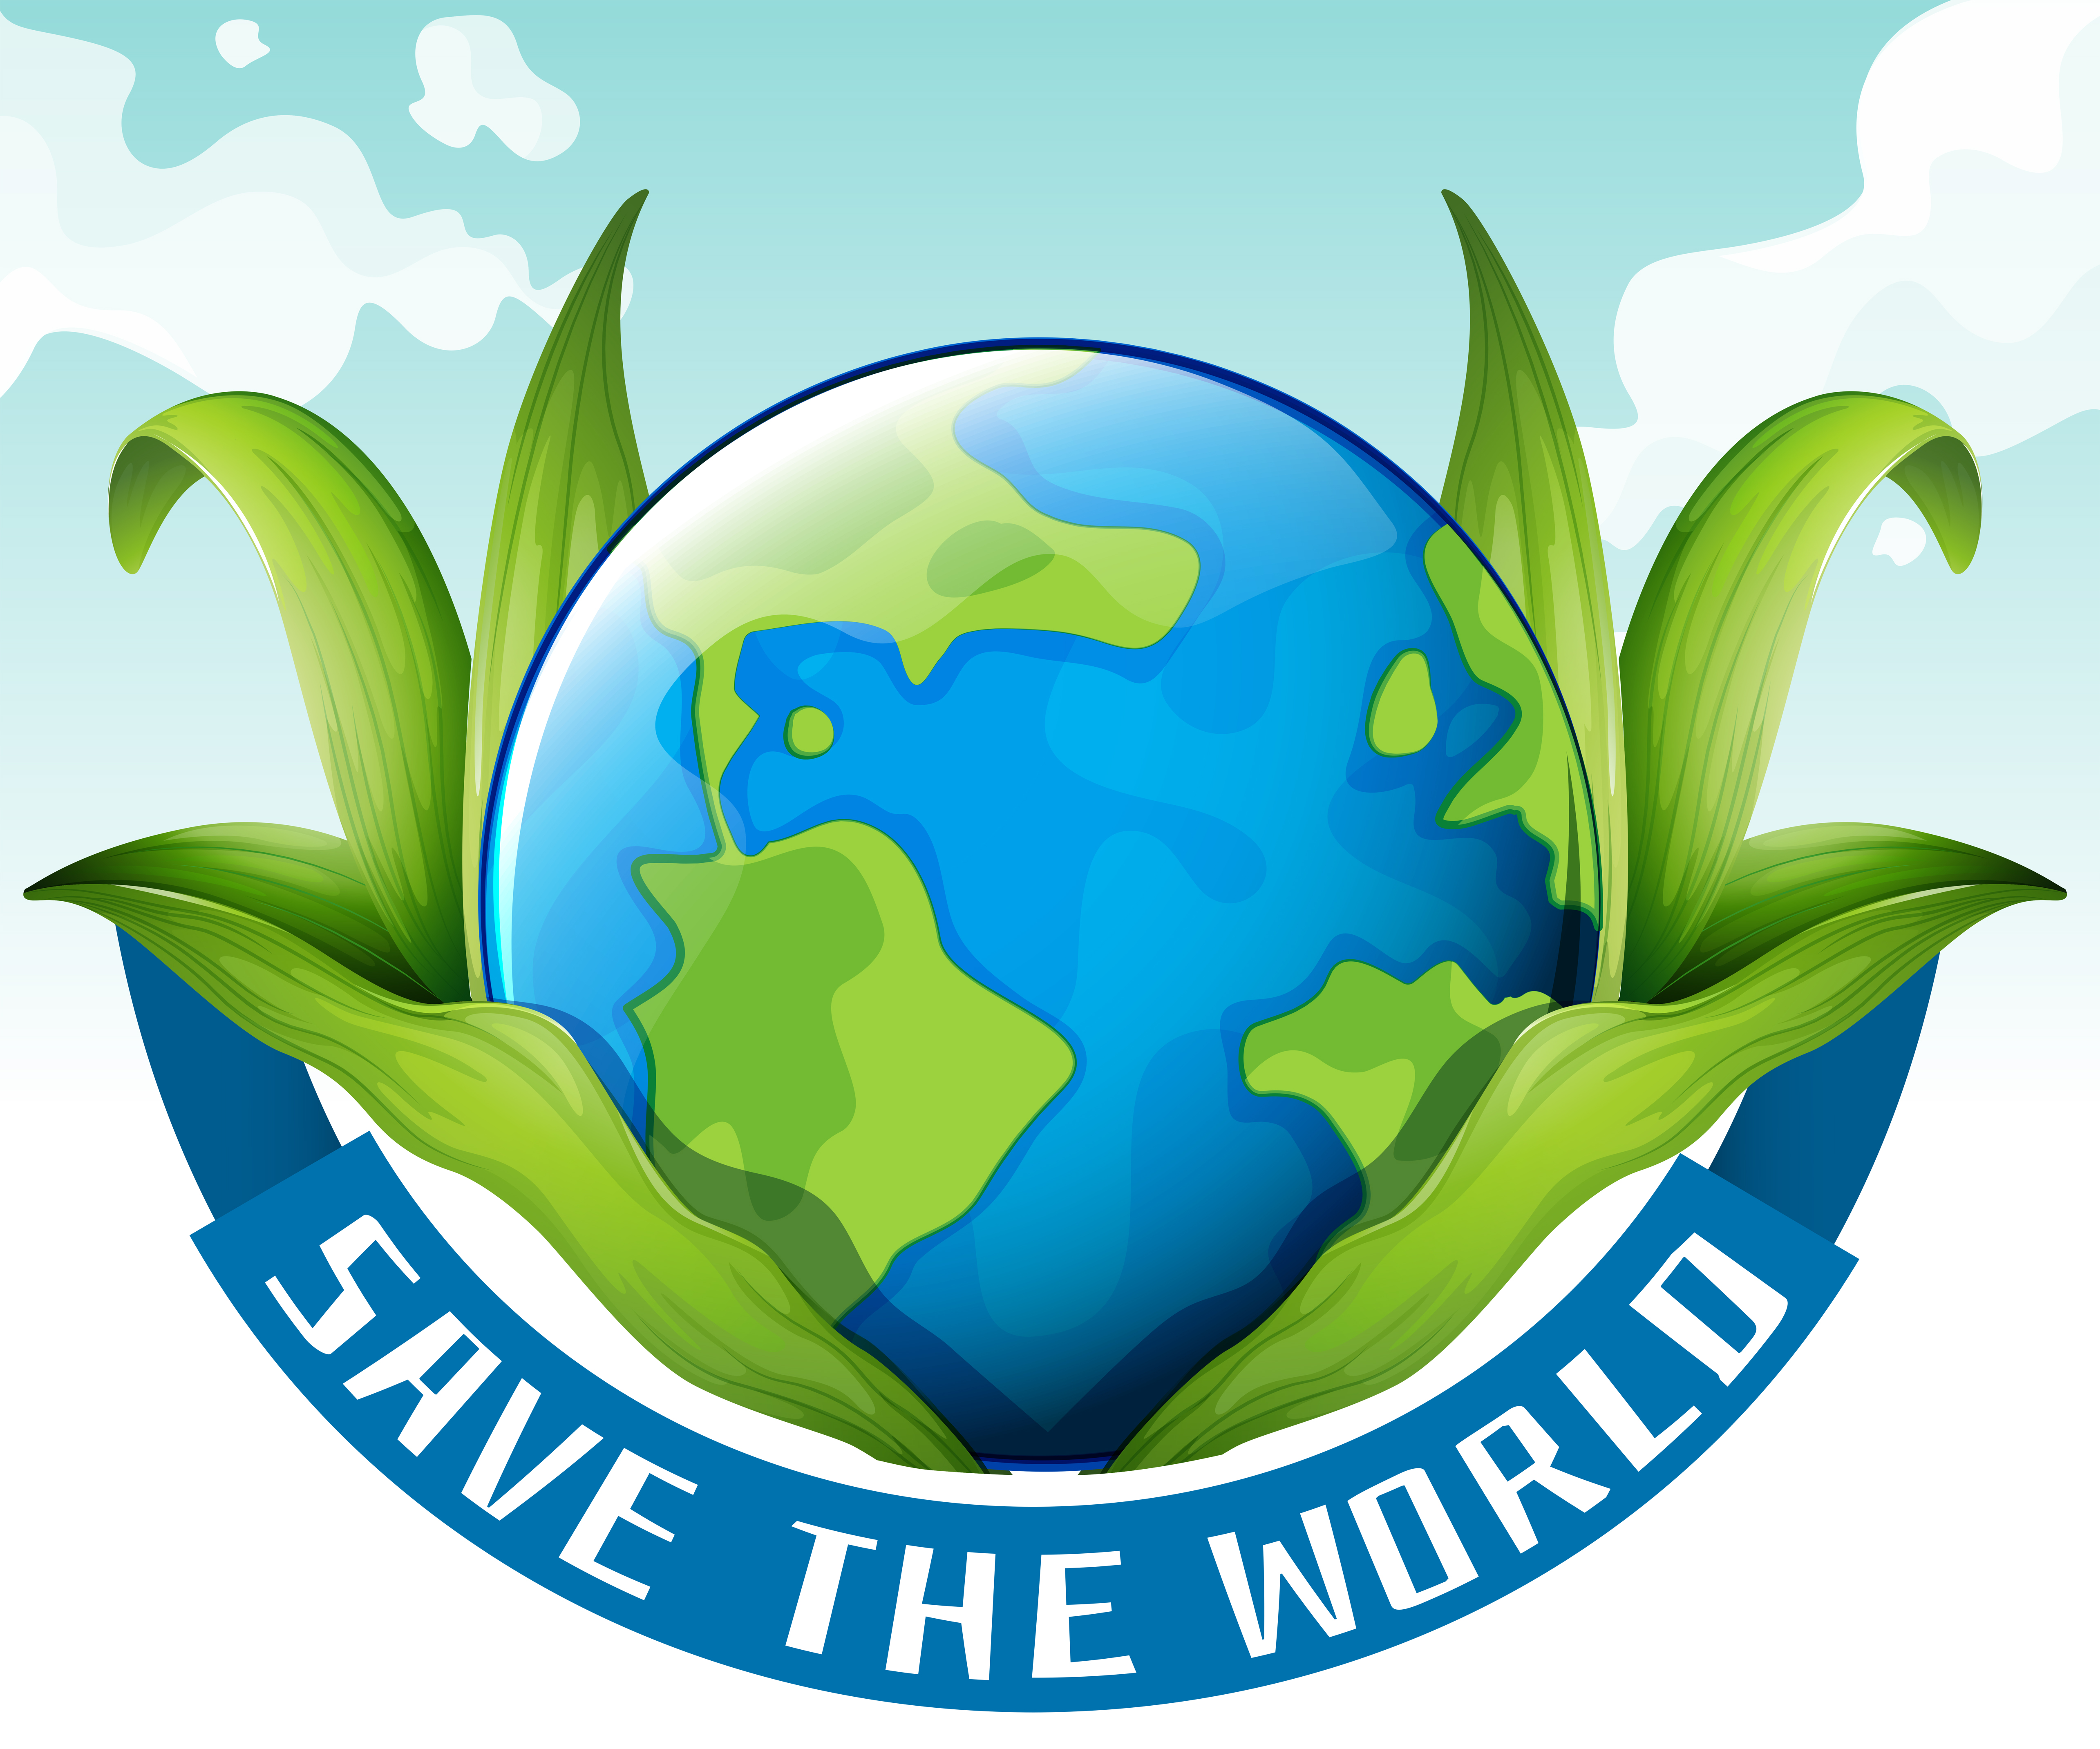 Save The World Poster - Save the world theme with earth and leaves